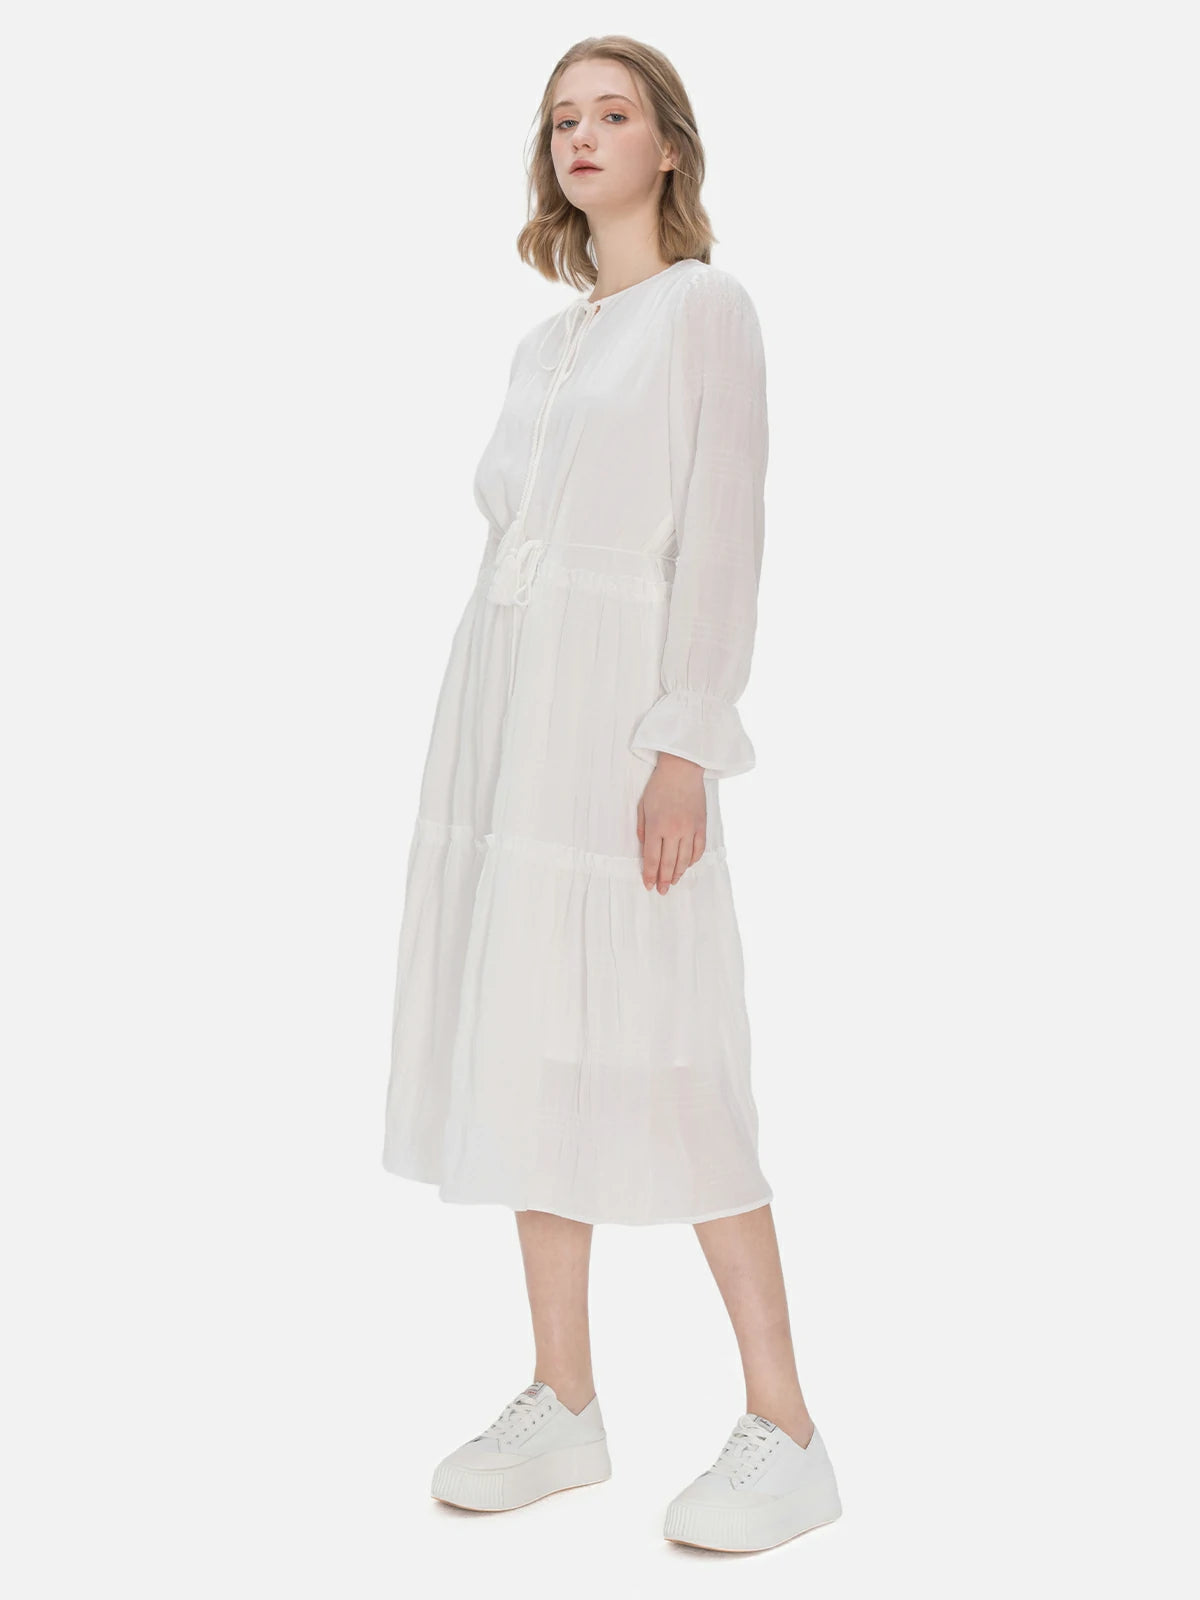 Tailored mid-length dress featuring white design, neckline tie, waist tie, and ruffle edges, providing a comfortable and stylish option.